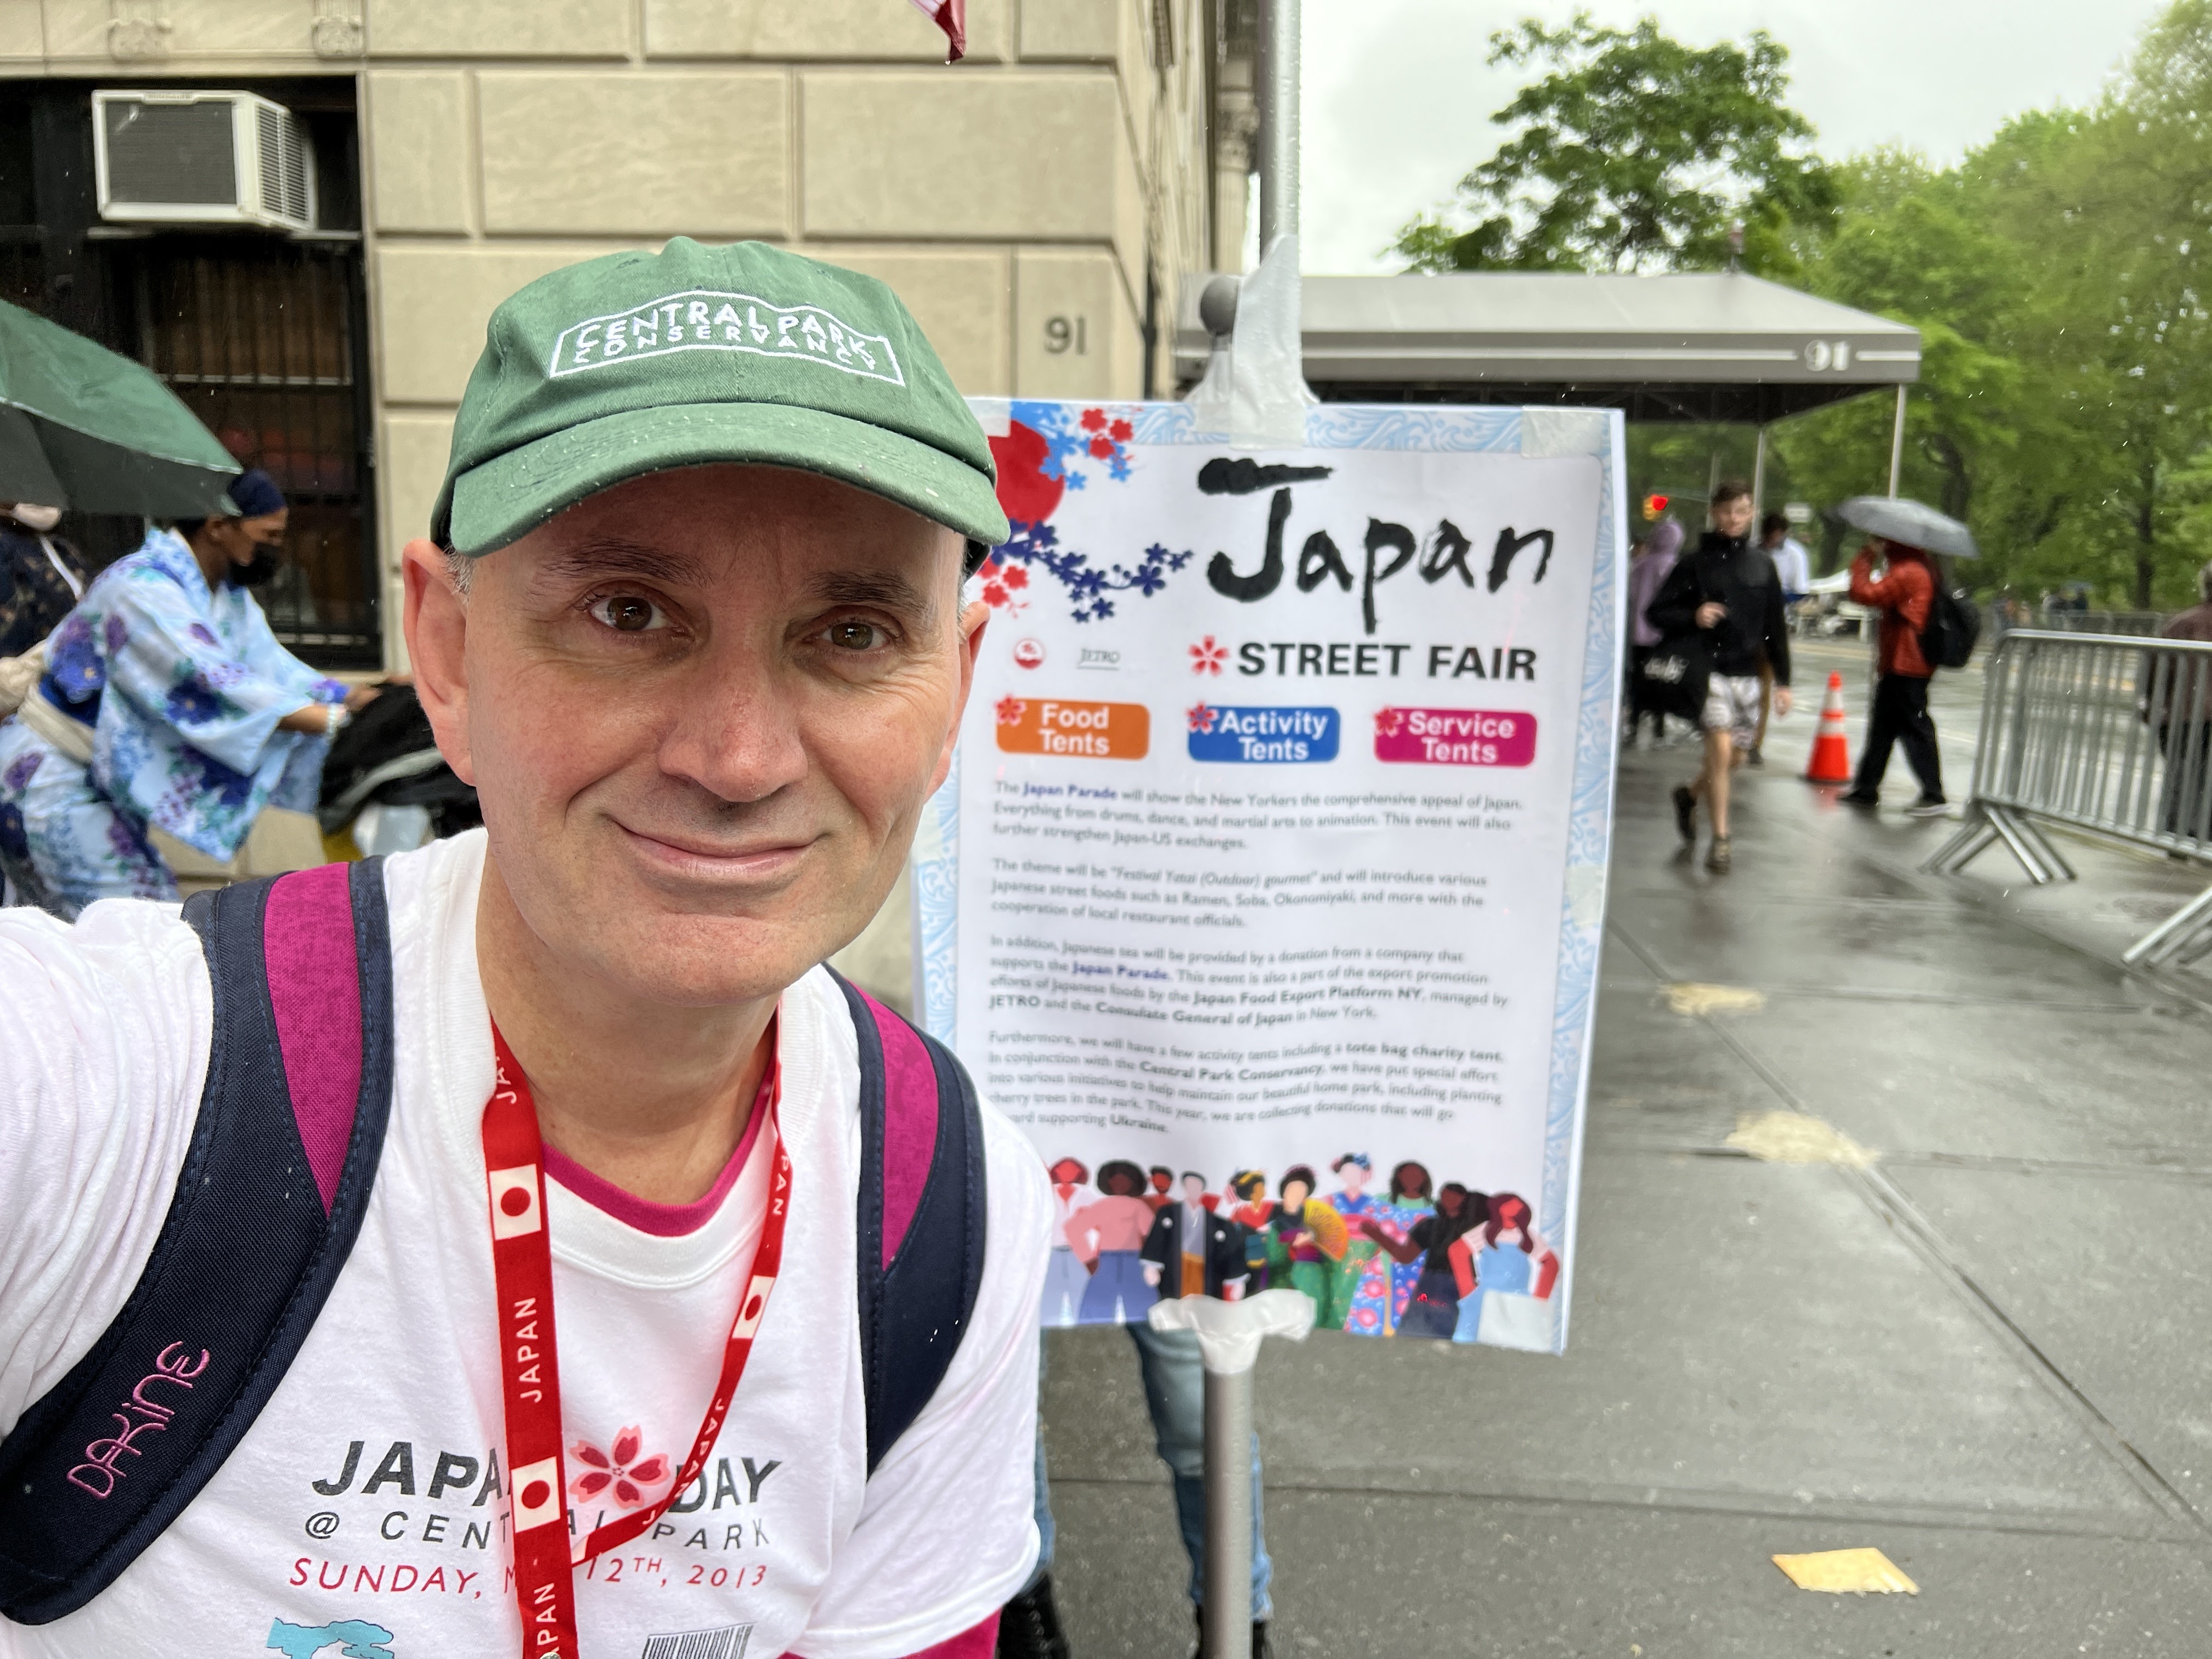 May 14th 2022 Saturday  Ryan Janek Wolowski  Japan Day  🇯🇵🌸🇯🇵 Central Park NYC  Japan Day @ Central Park is an annual outdoor festival in NYC. It started in 2007 as a way to say “Thank You” to the city of New York for being such a gracious home to the Japanese community.  #Japan #Japanese  #JapanDay #JapanDayCentralPark #JapanDayCentralParkNYC #JDCP #JDCPNYC #CentralPark #CentralParkNYC #NewYorkCity #JapanParade  #JapanStreetFair  #HelloKitty  #JPop  #photo #iPhonePhotography #WelcomeSign